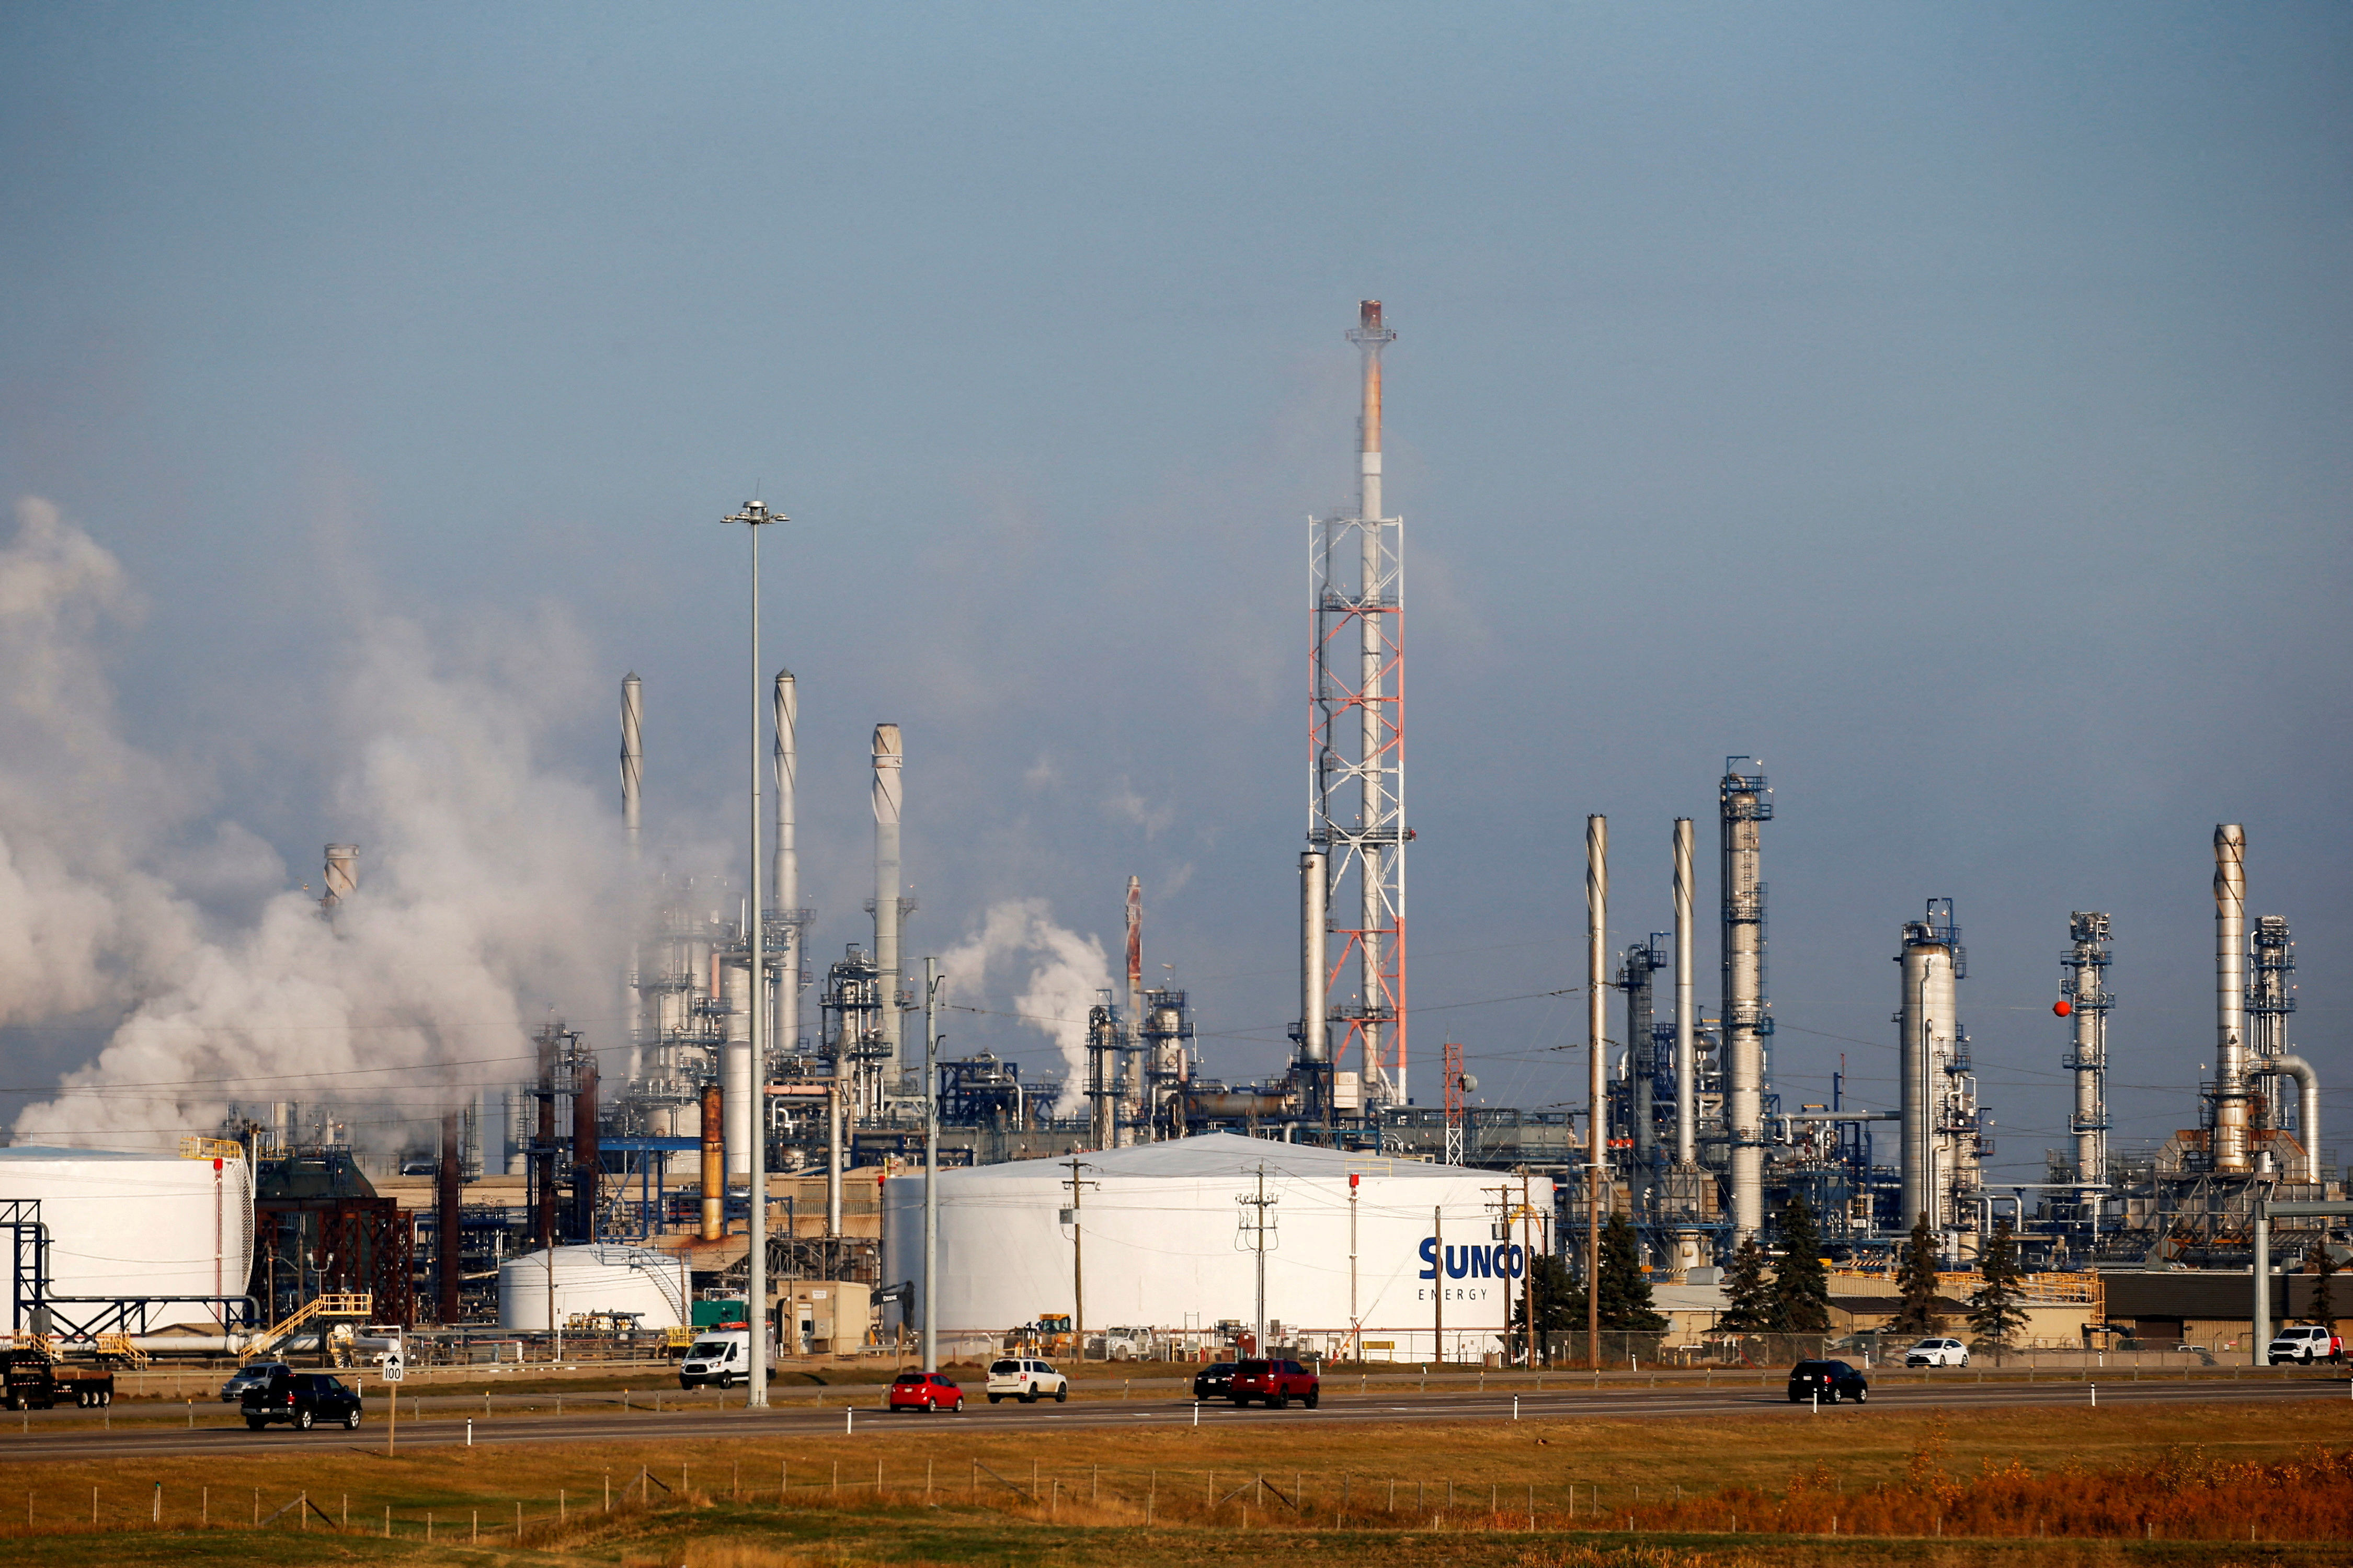 Petrochemical storage tanks are seen at the Suncor Energy chemical plant near Edmonton